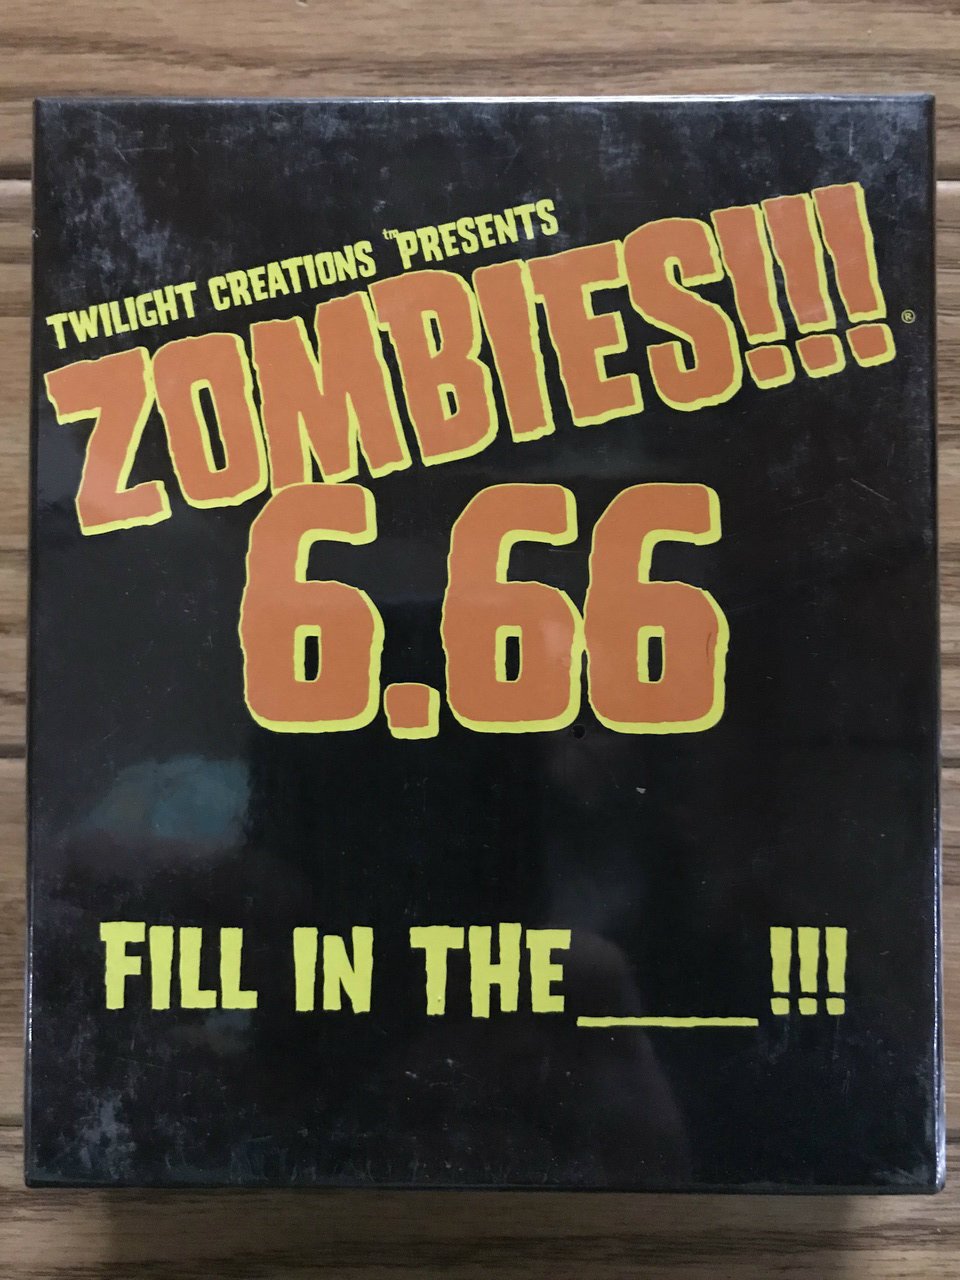 Zombies!!! 6.66: Fill in the Blank!!! (*See Per Order Flat Rate Shipping)